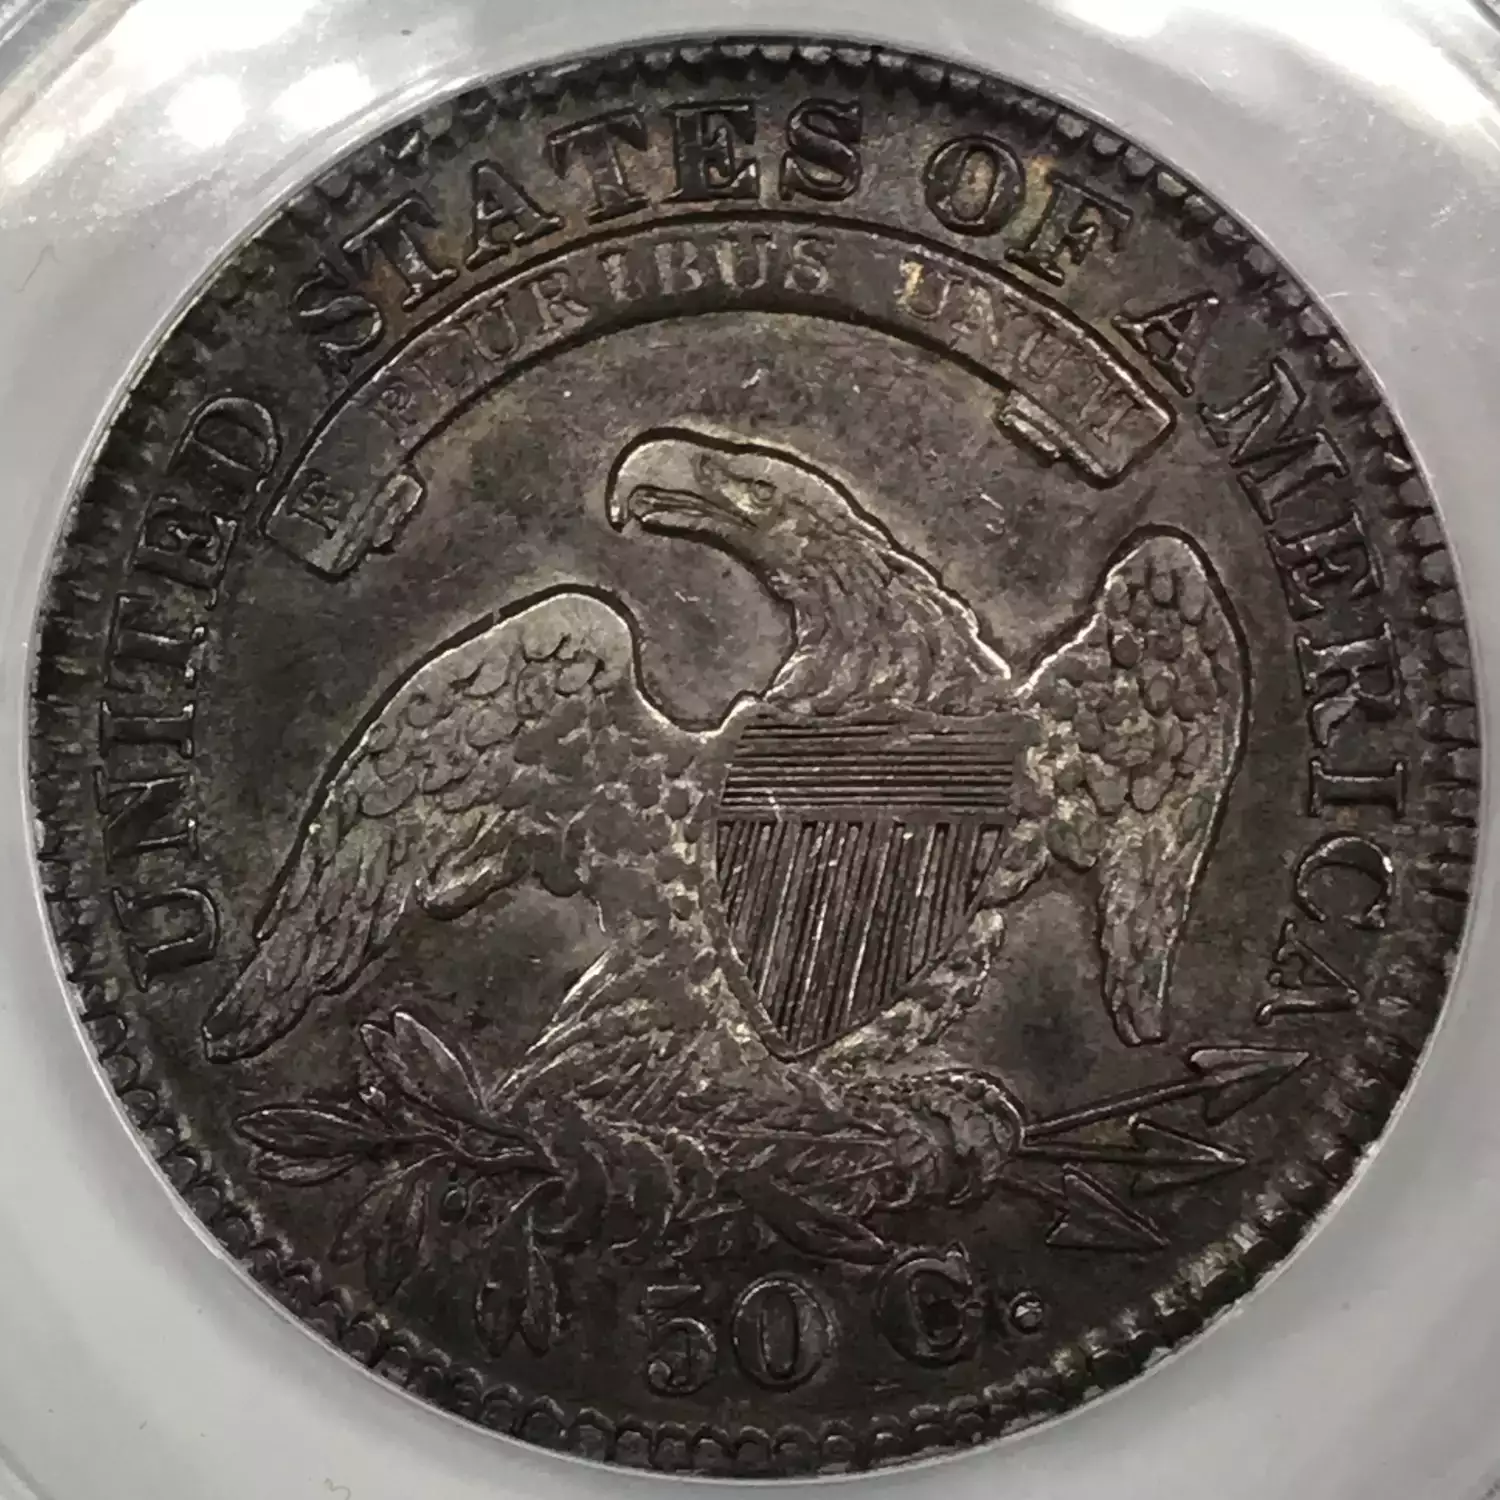 Half Dollars---Capped Bust, Lettered Edge 1807-1836 -Silver- 0.5 Dollar (3)